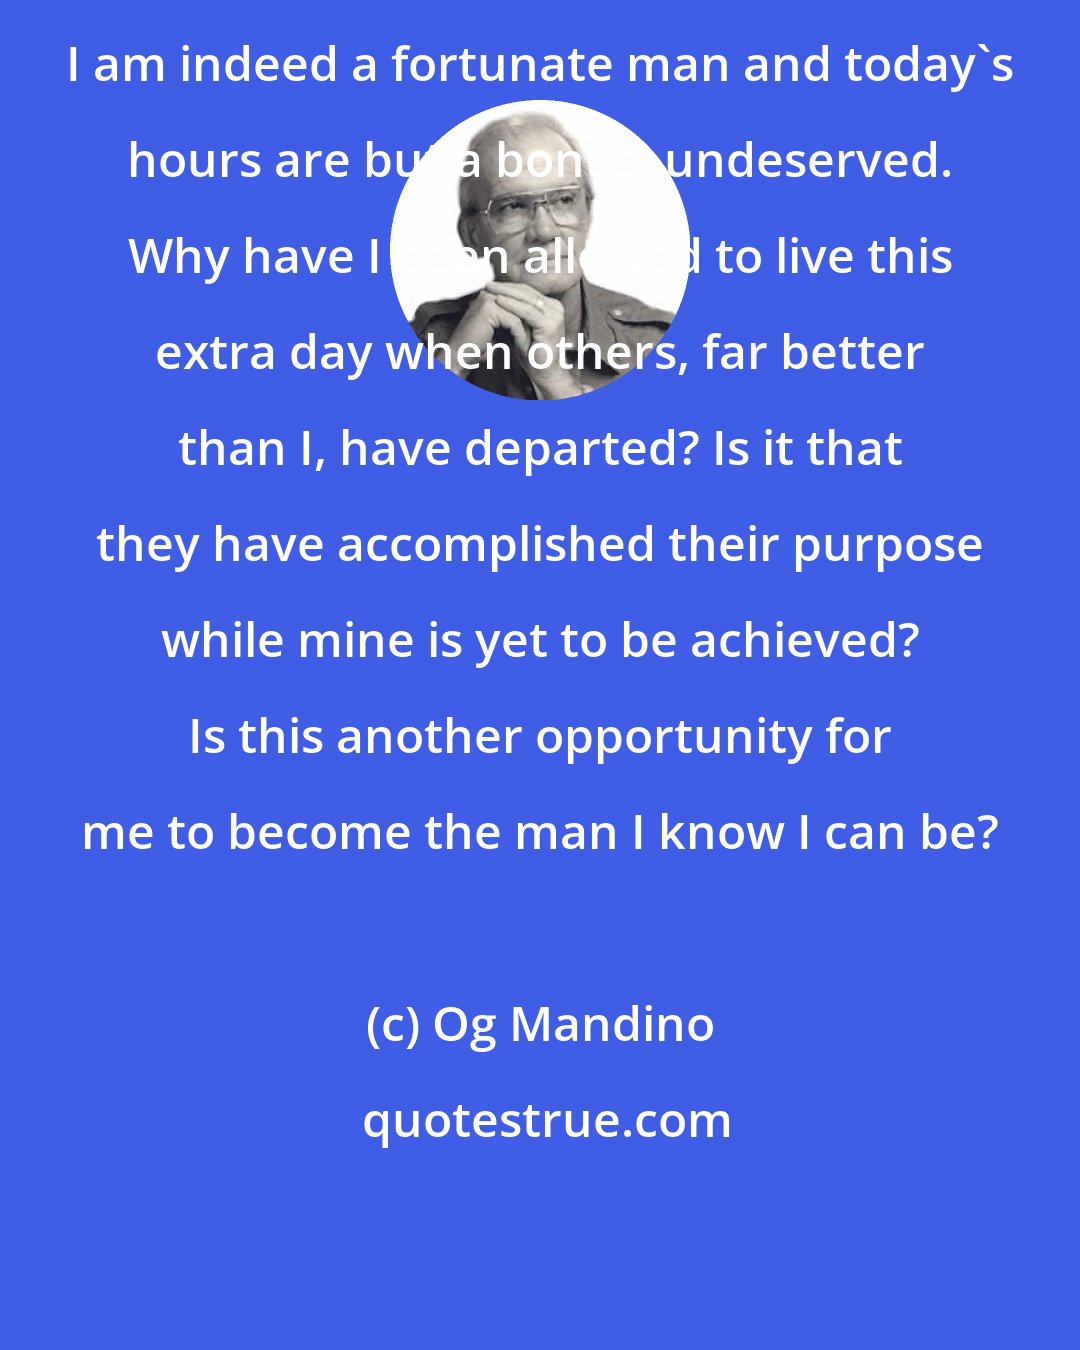 Og Mandino: I am indeed a fortunate man and today's hours are but a bonus, undeserved. Why have I been allowed to live this extra day when others, far better than I, have departed? Is it that they have accomplished their purpose while mine is yet to be achieved? Is this another opportunity for me to become the man I know I can be?